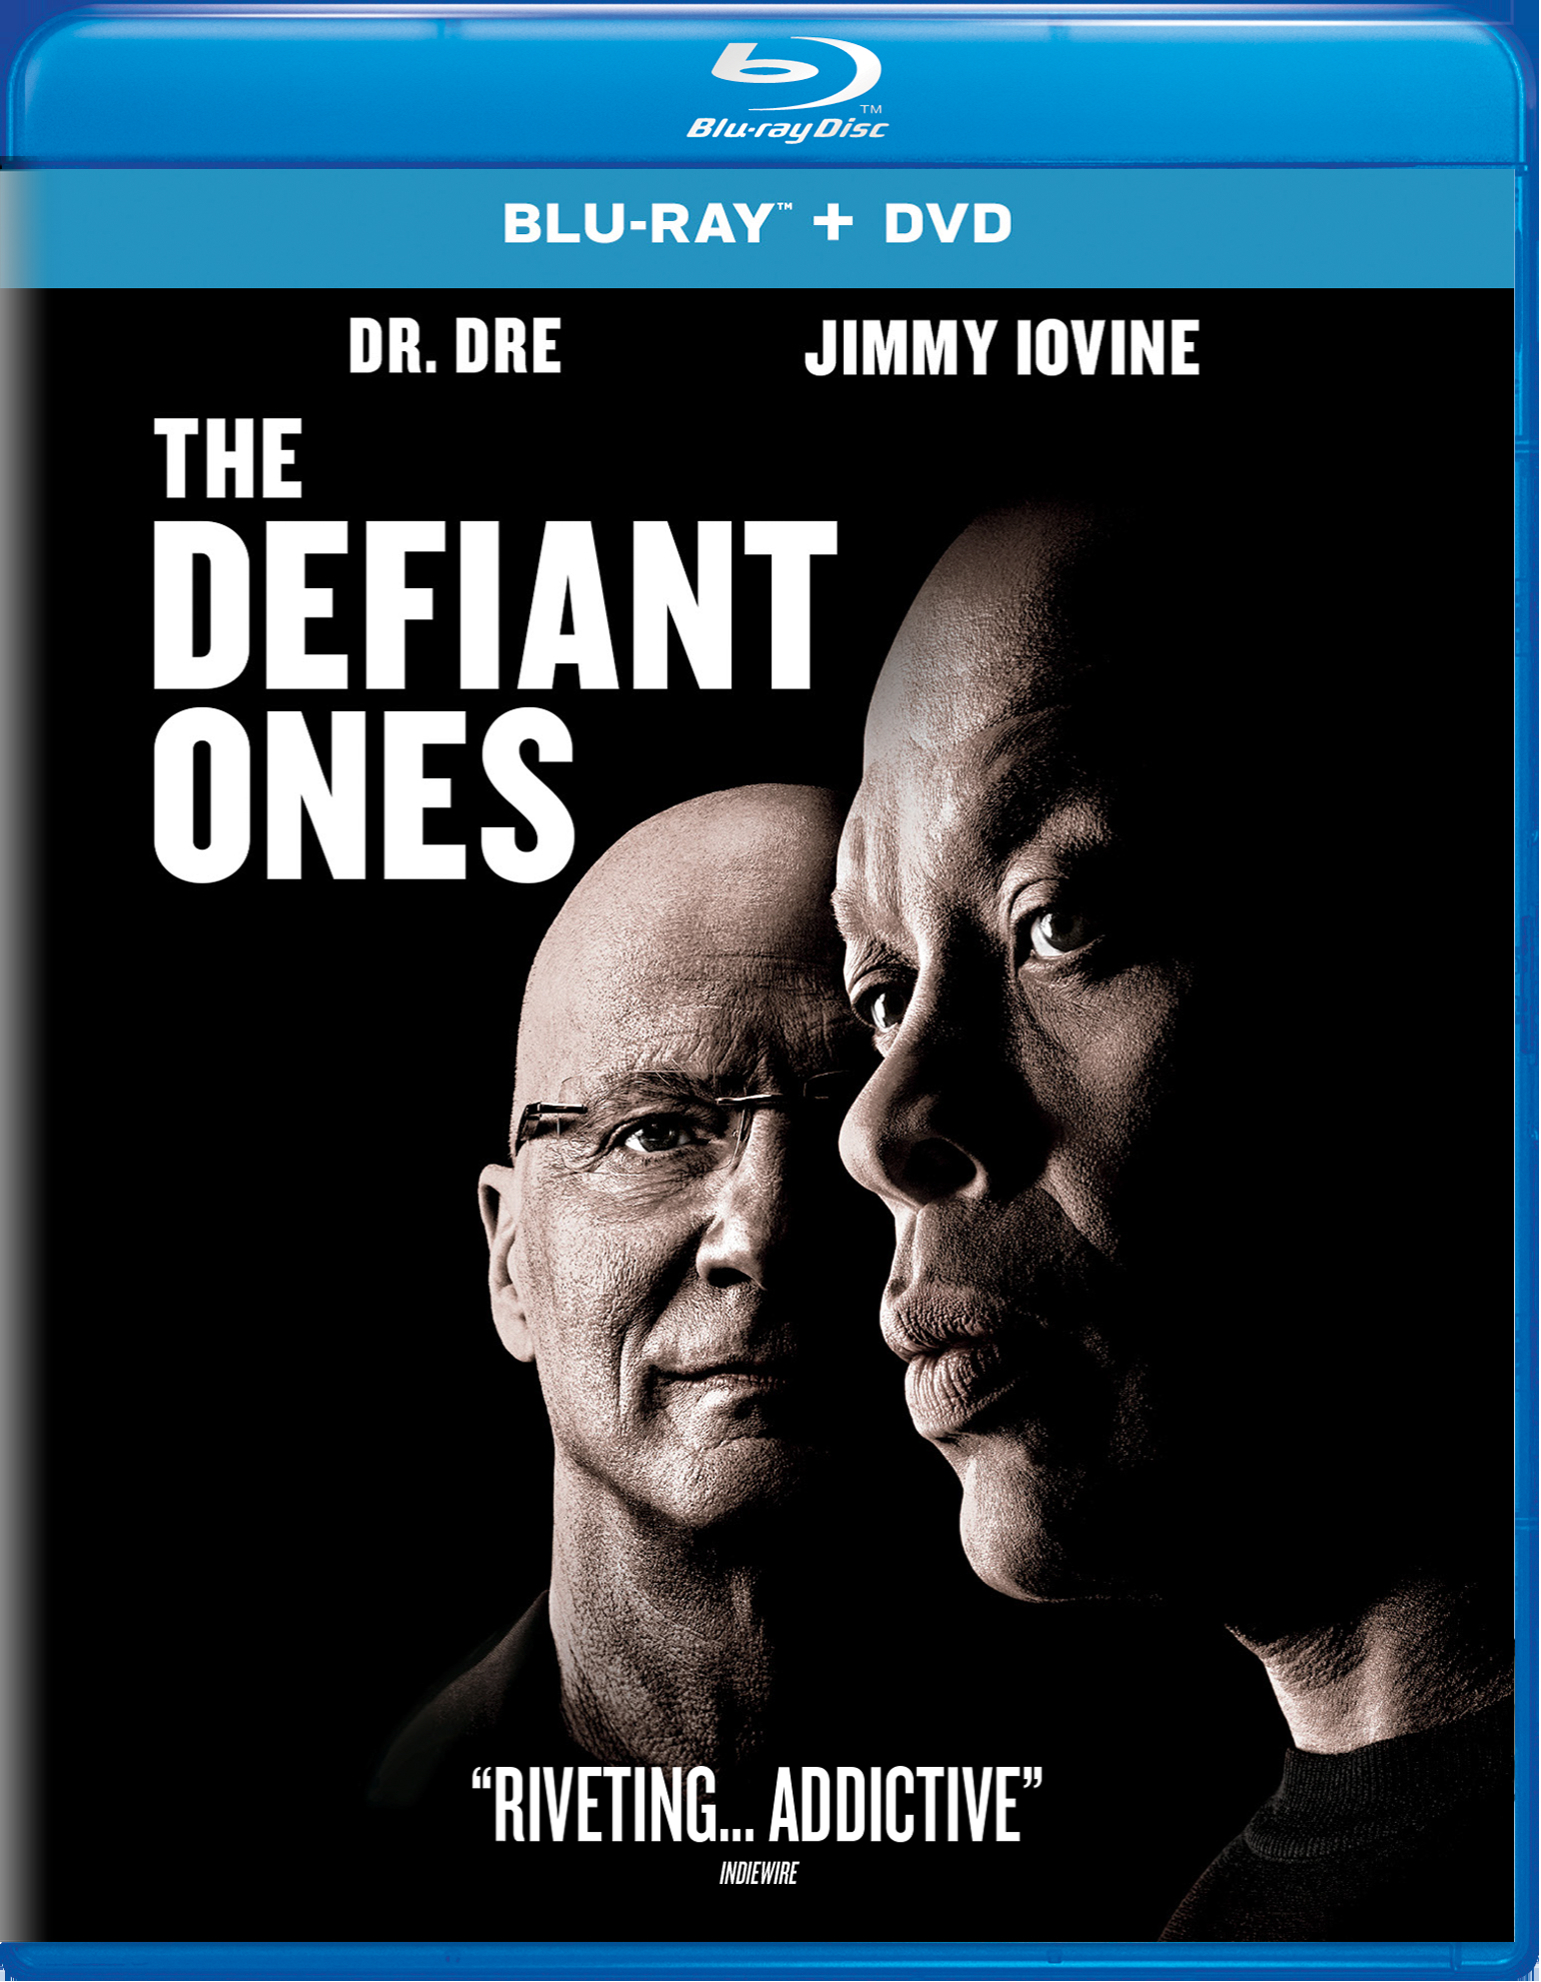 The Defiant Ones (with DVD) - Blu-ray [ 2018 ]  - Documentaries On Blu-ray